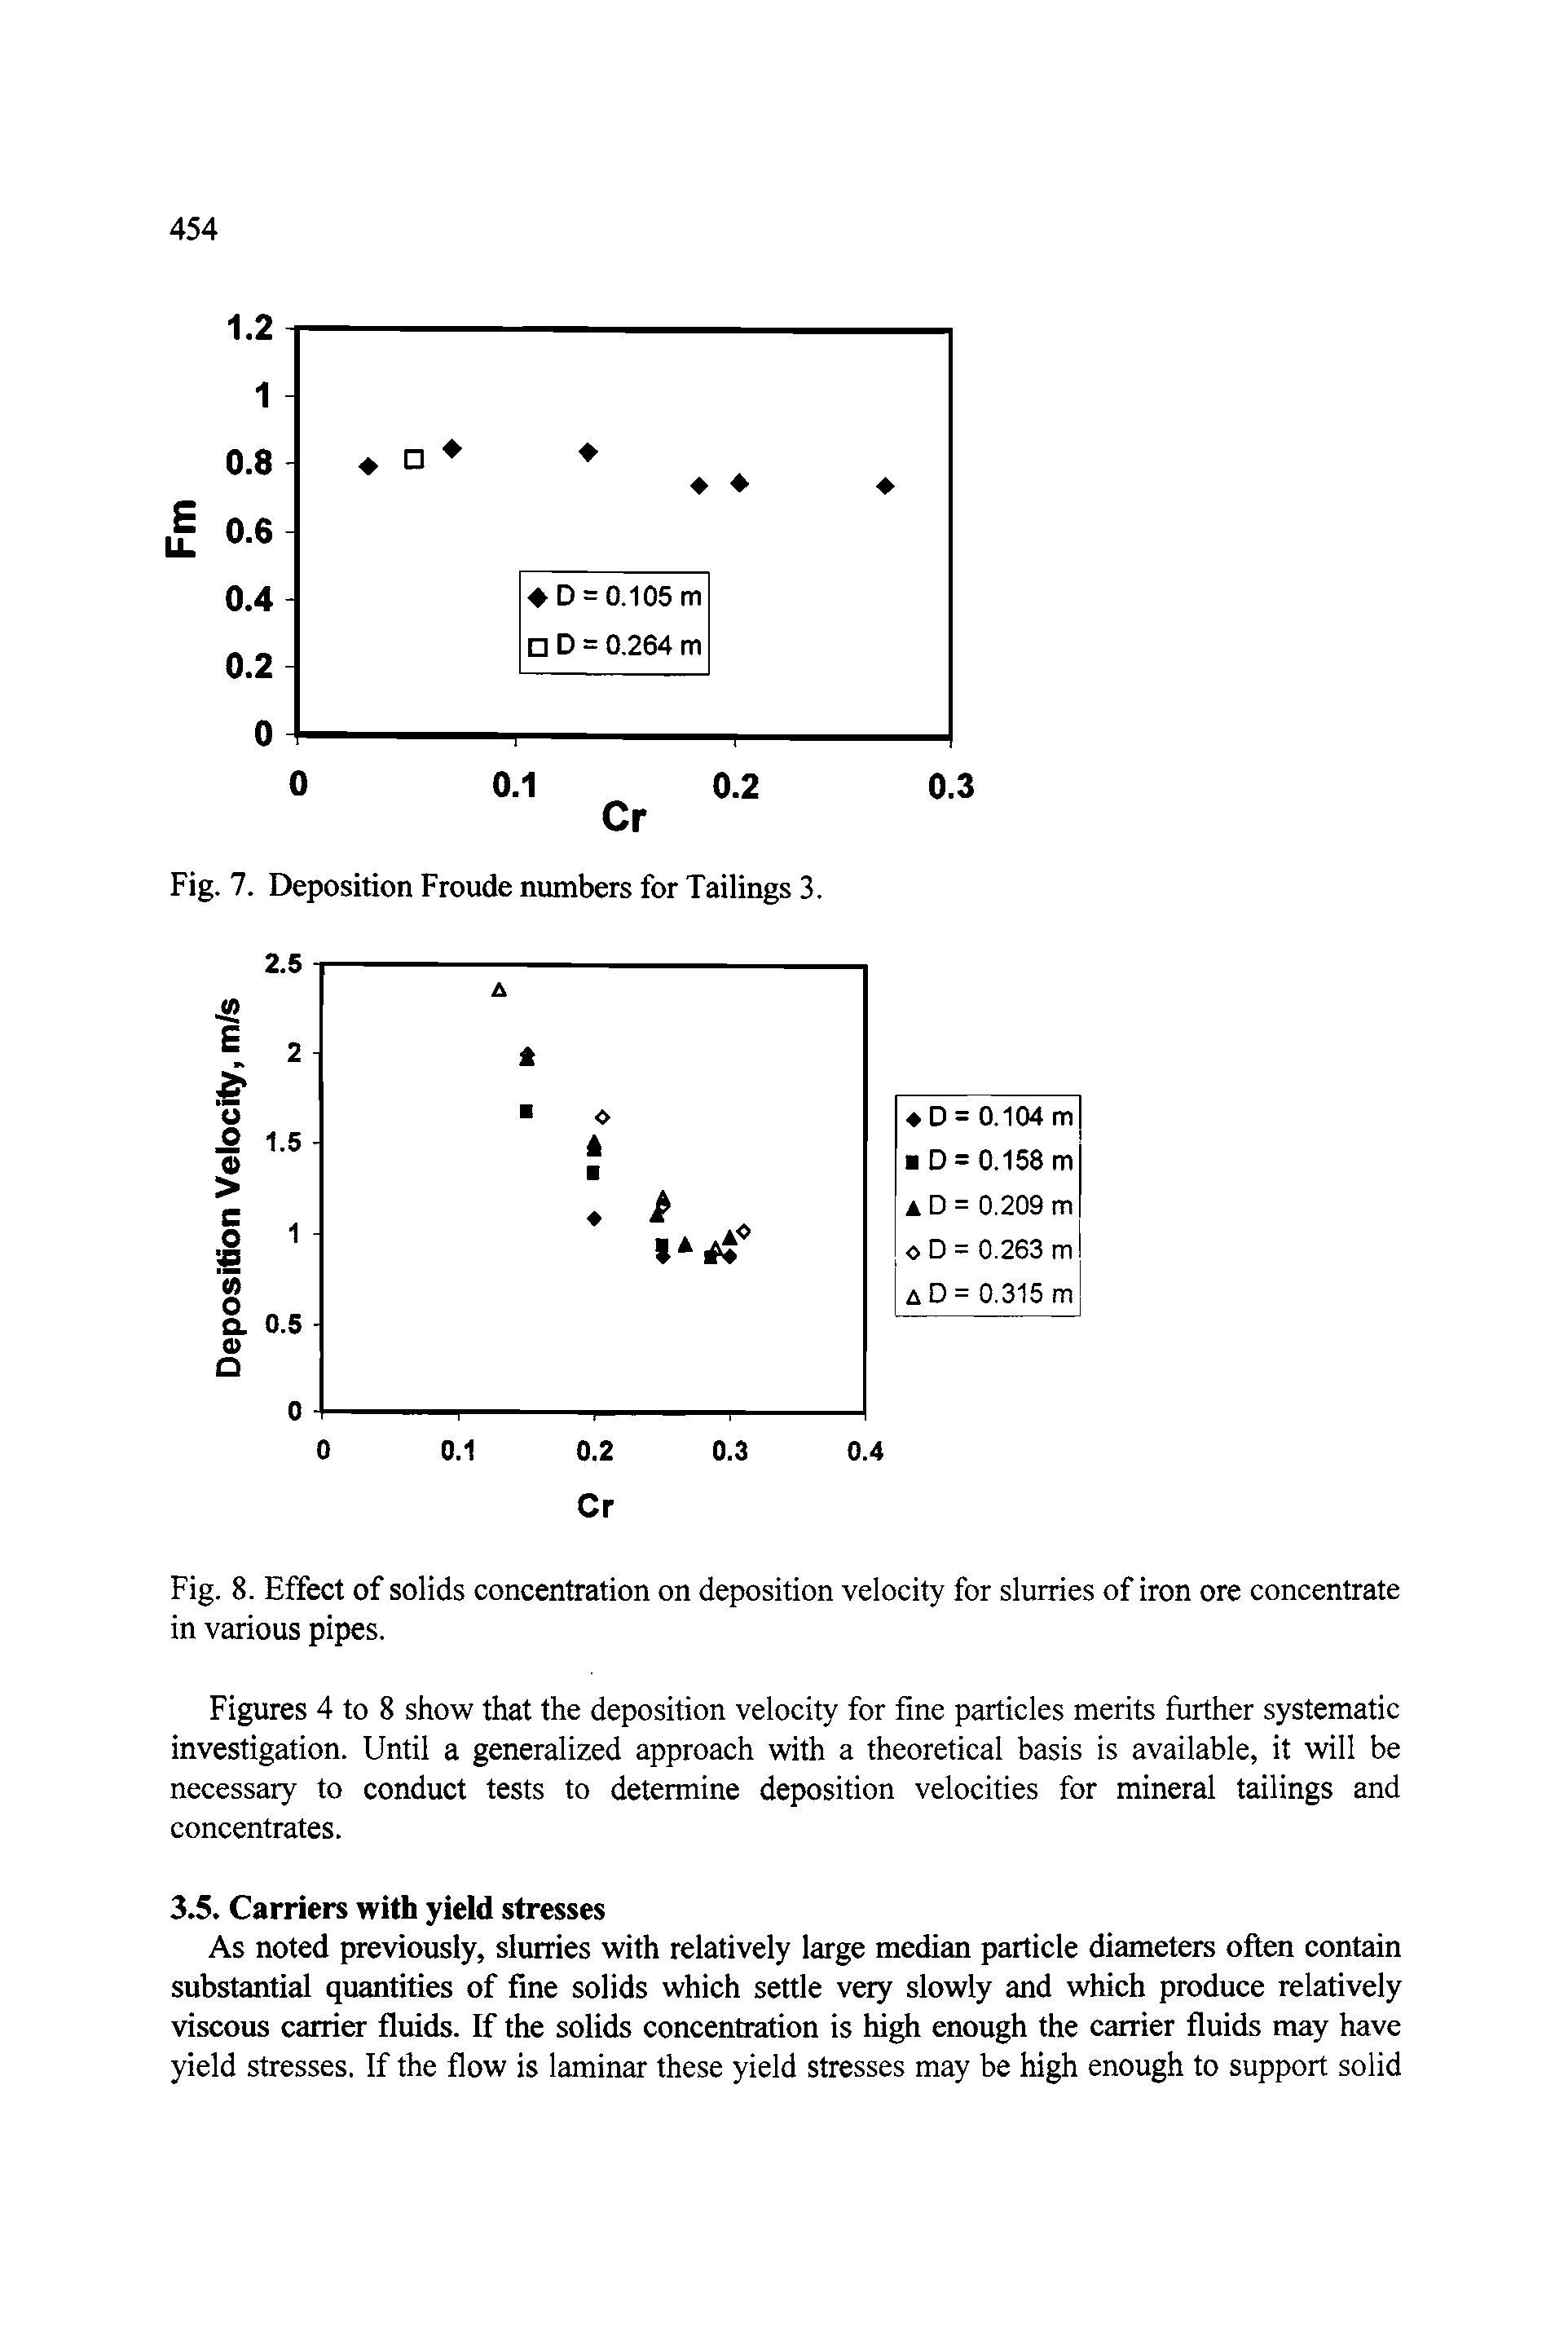 Fig. 8. Effect of solids concentration on deposition velocity for slurries of iron ore concentrate in various pipes.